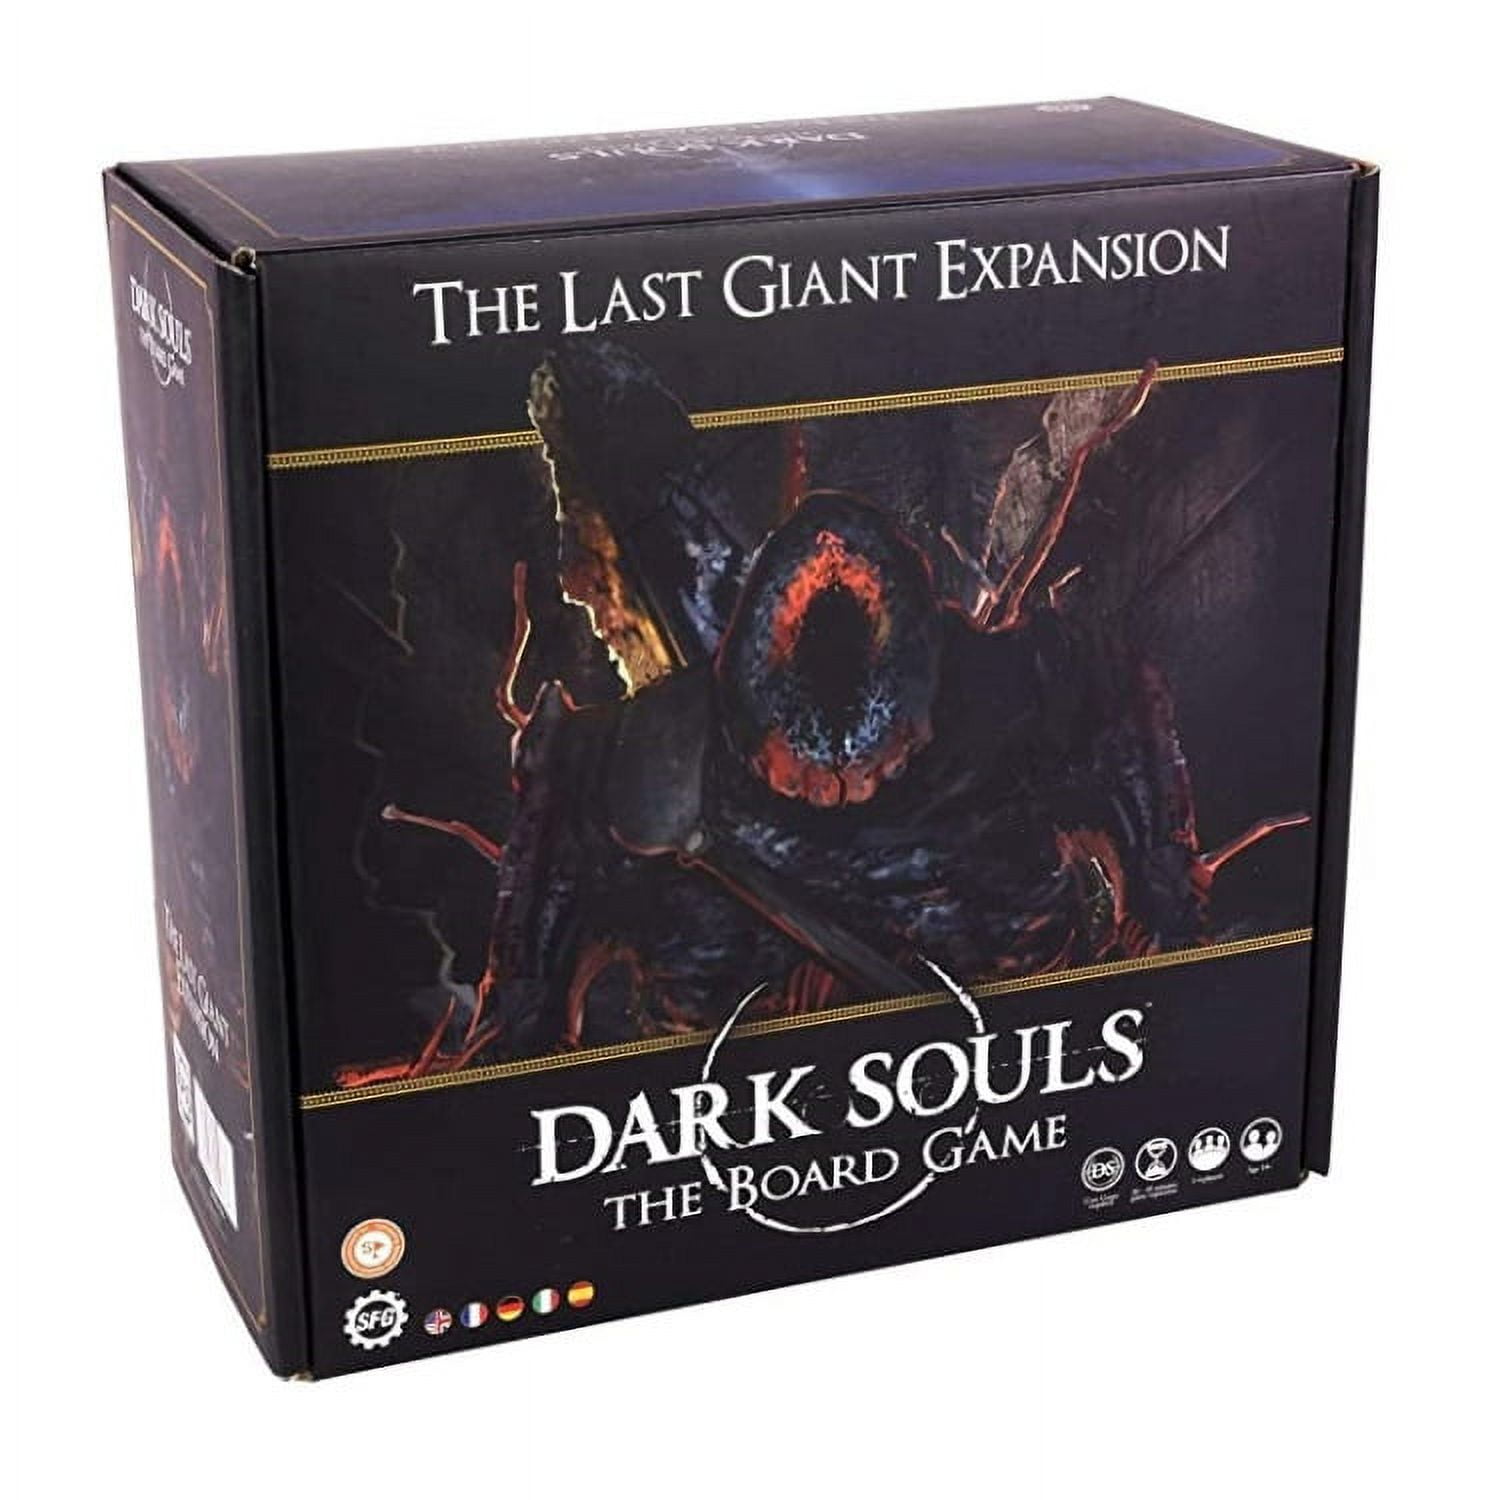 STESFDS-016 Dark Souls Last Giant Expansion Board Game -  Steamforged Games